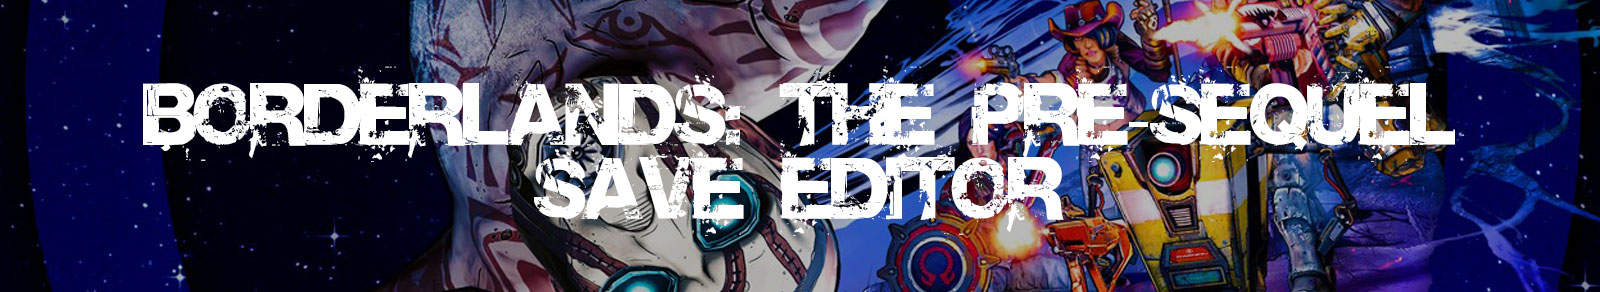 how to use gibbed save editor borderlands 2